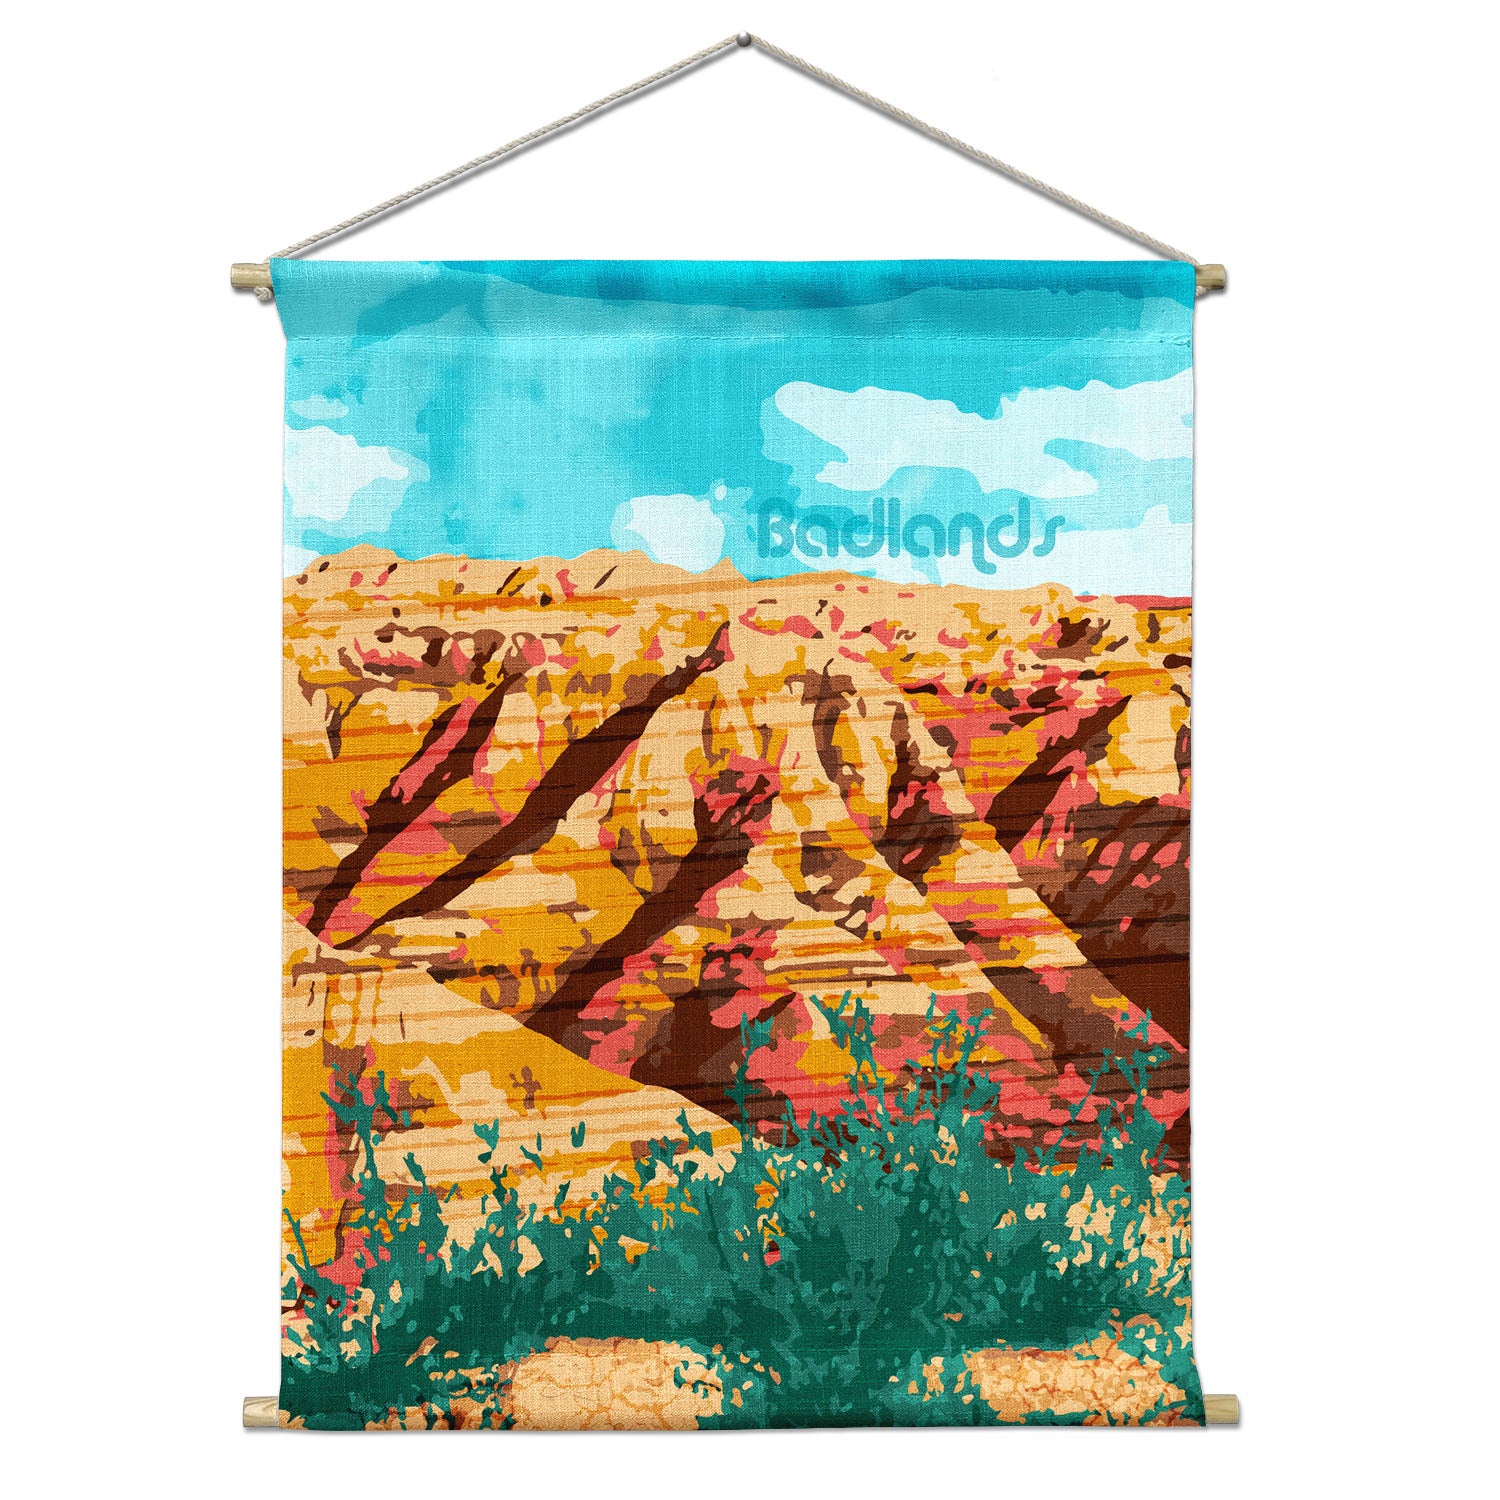 Badlands National Park Abstract Portrait Wall Hanging - Natural -  - Knotty Tie Co.